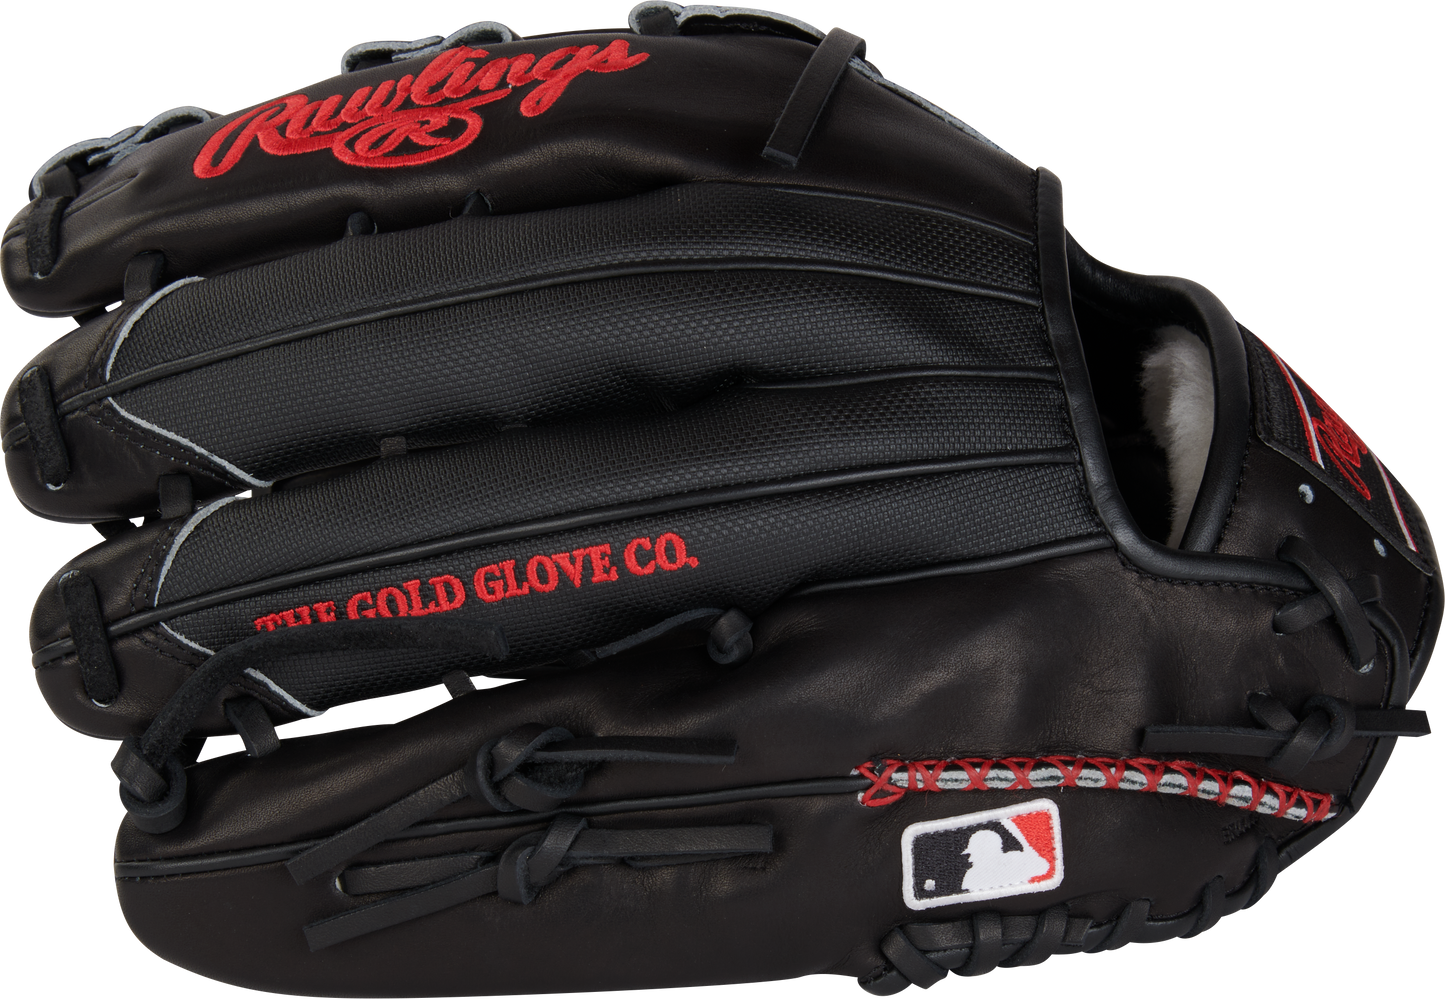 RAWLINGS PRO PREFERRED SERIES 12.75-INCH OUTFIELD GLOVE